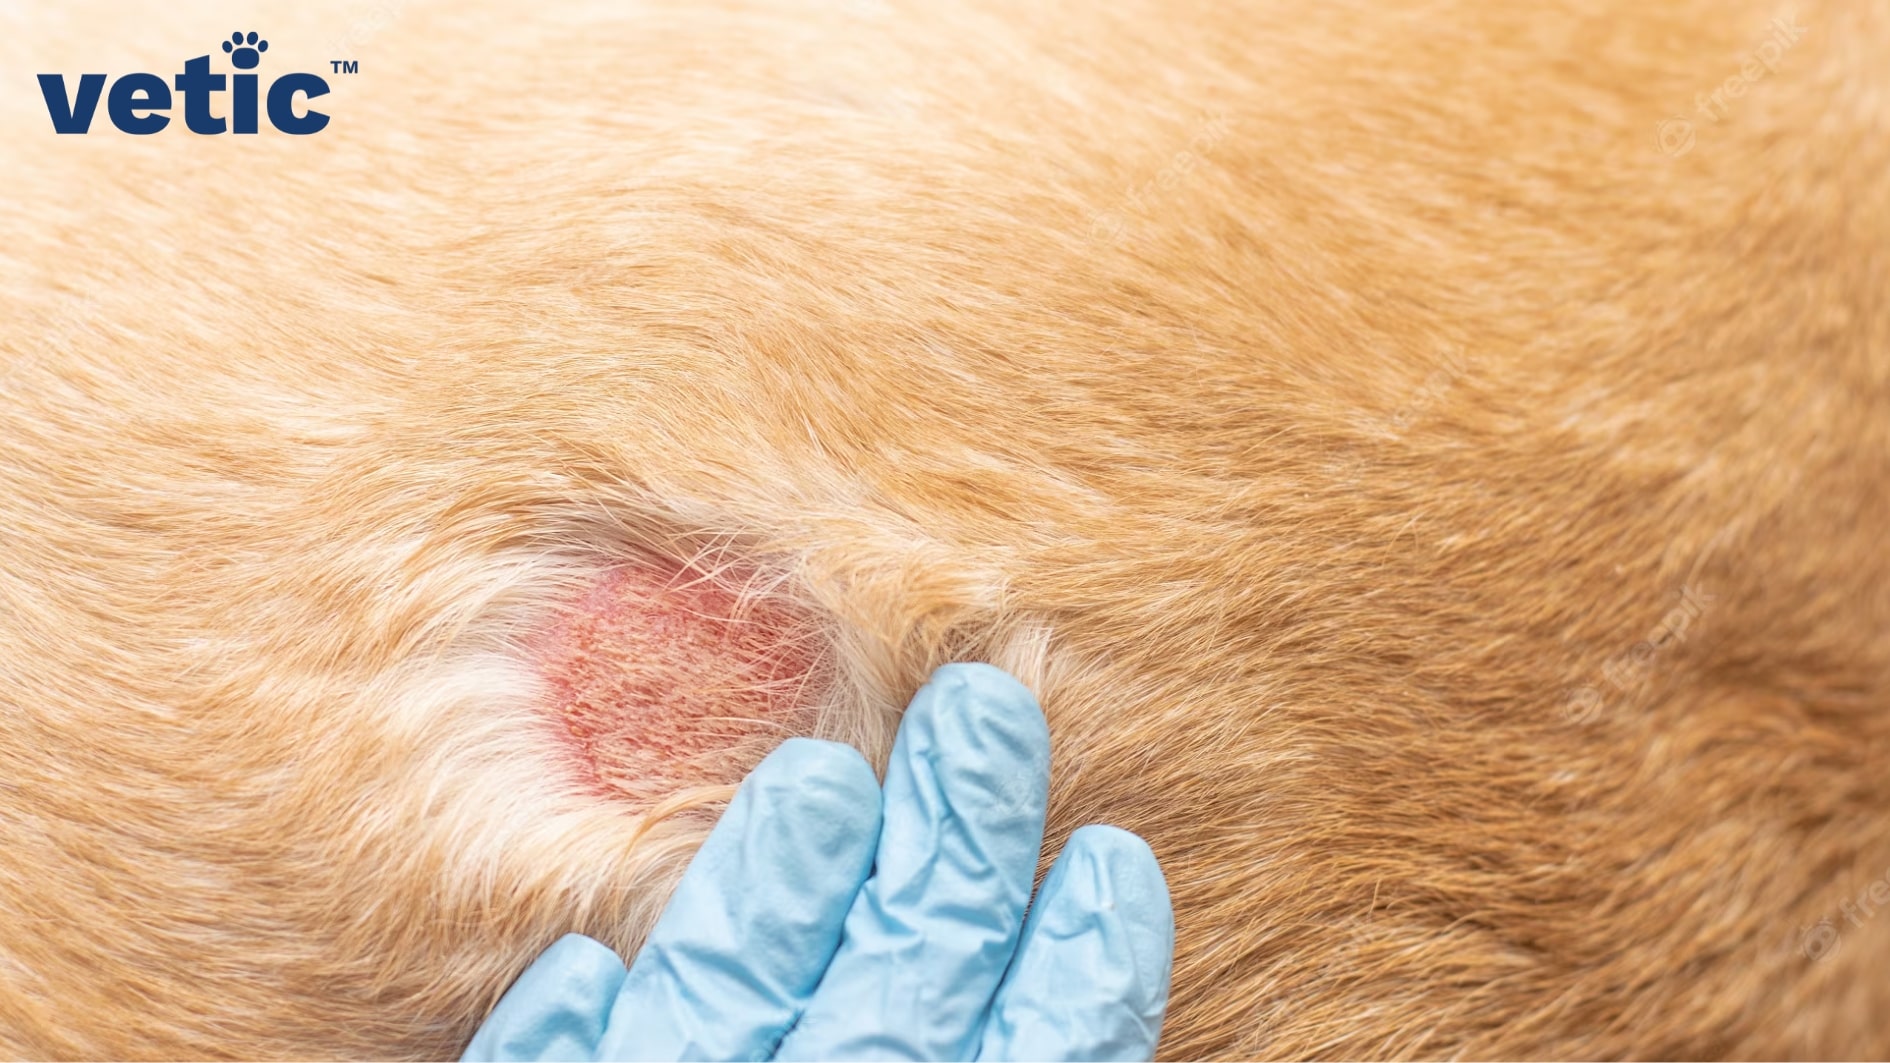 Hand wearing blue glove examining the skin of a brown short-haired dog with a probable ringworm infection. Ringworm or dermatophyte is a fungal infection in dogs that contagious but curable